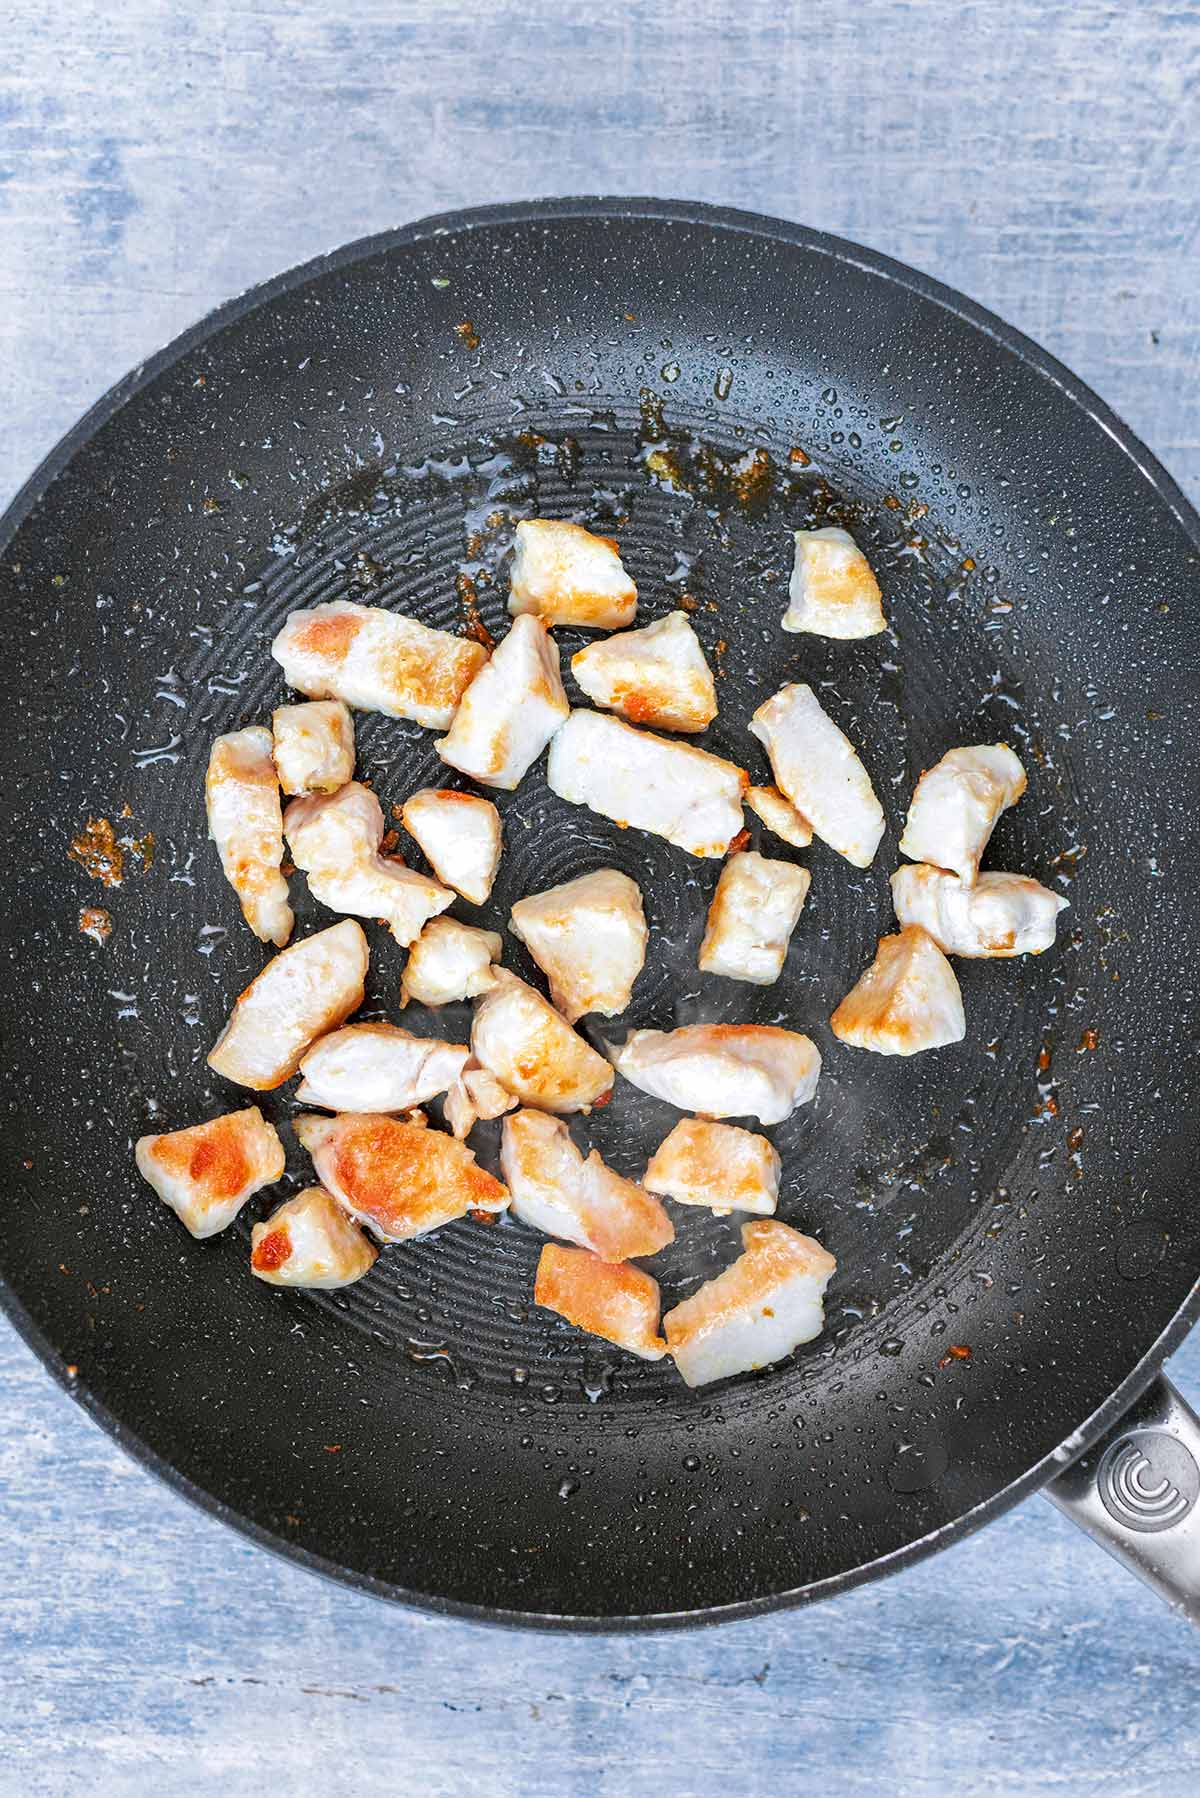 A frying pan with chunks of chicken cooking in it.